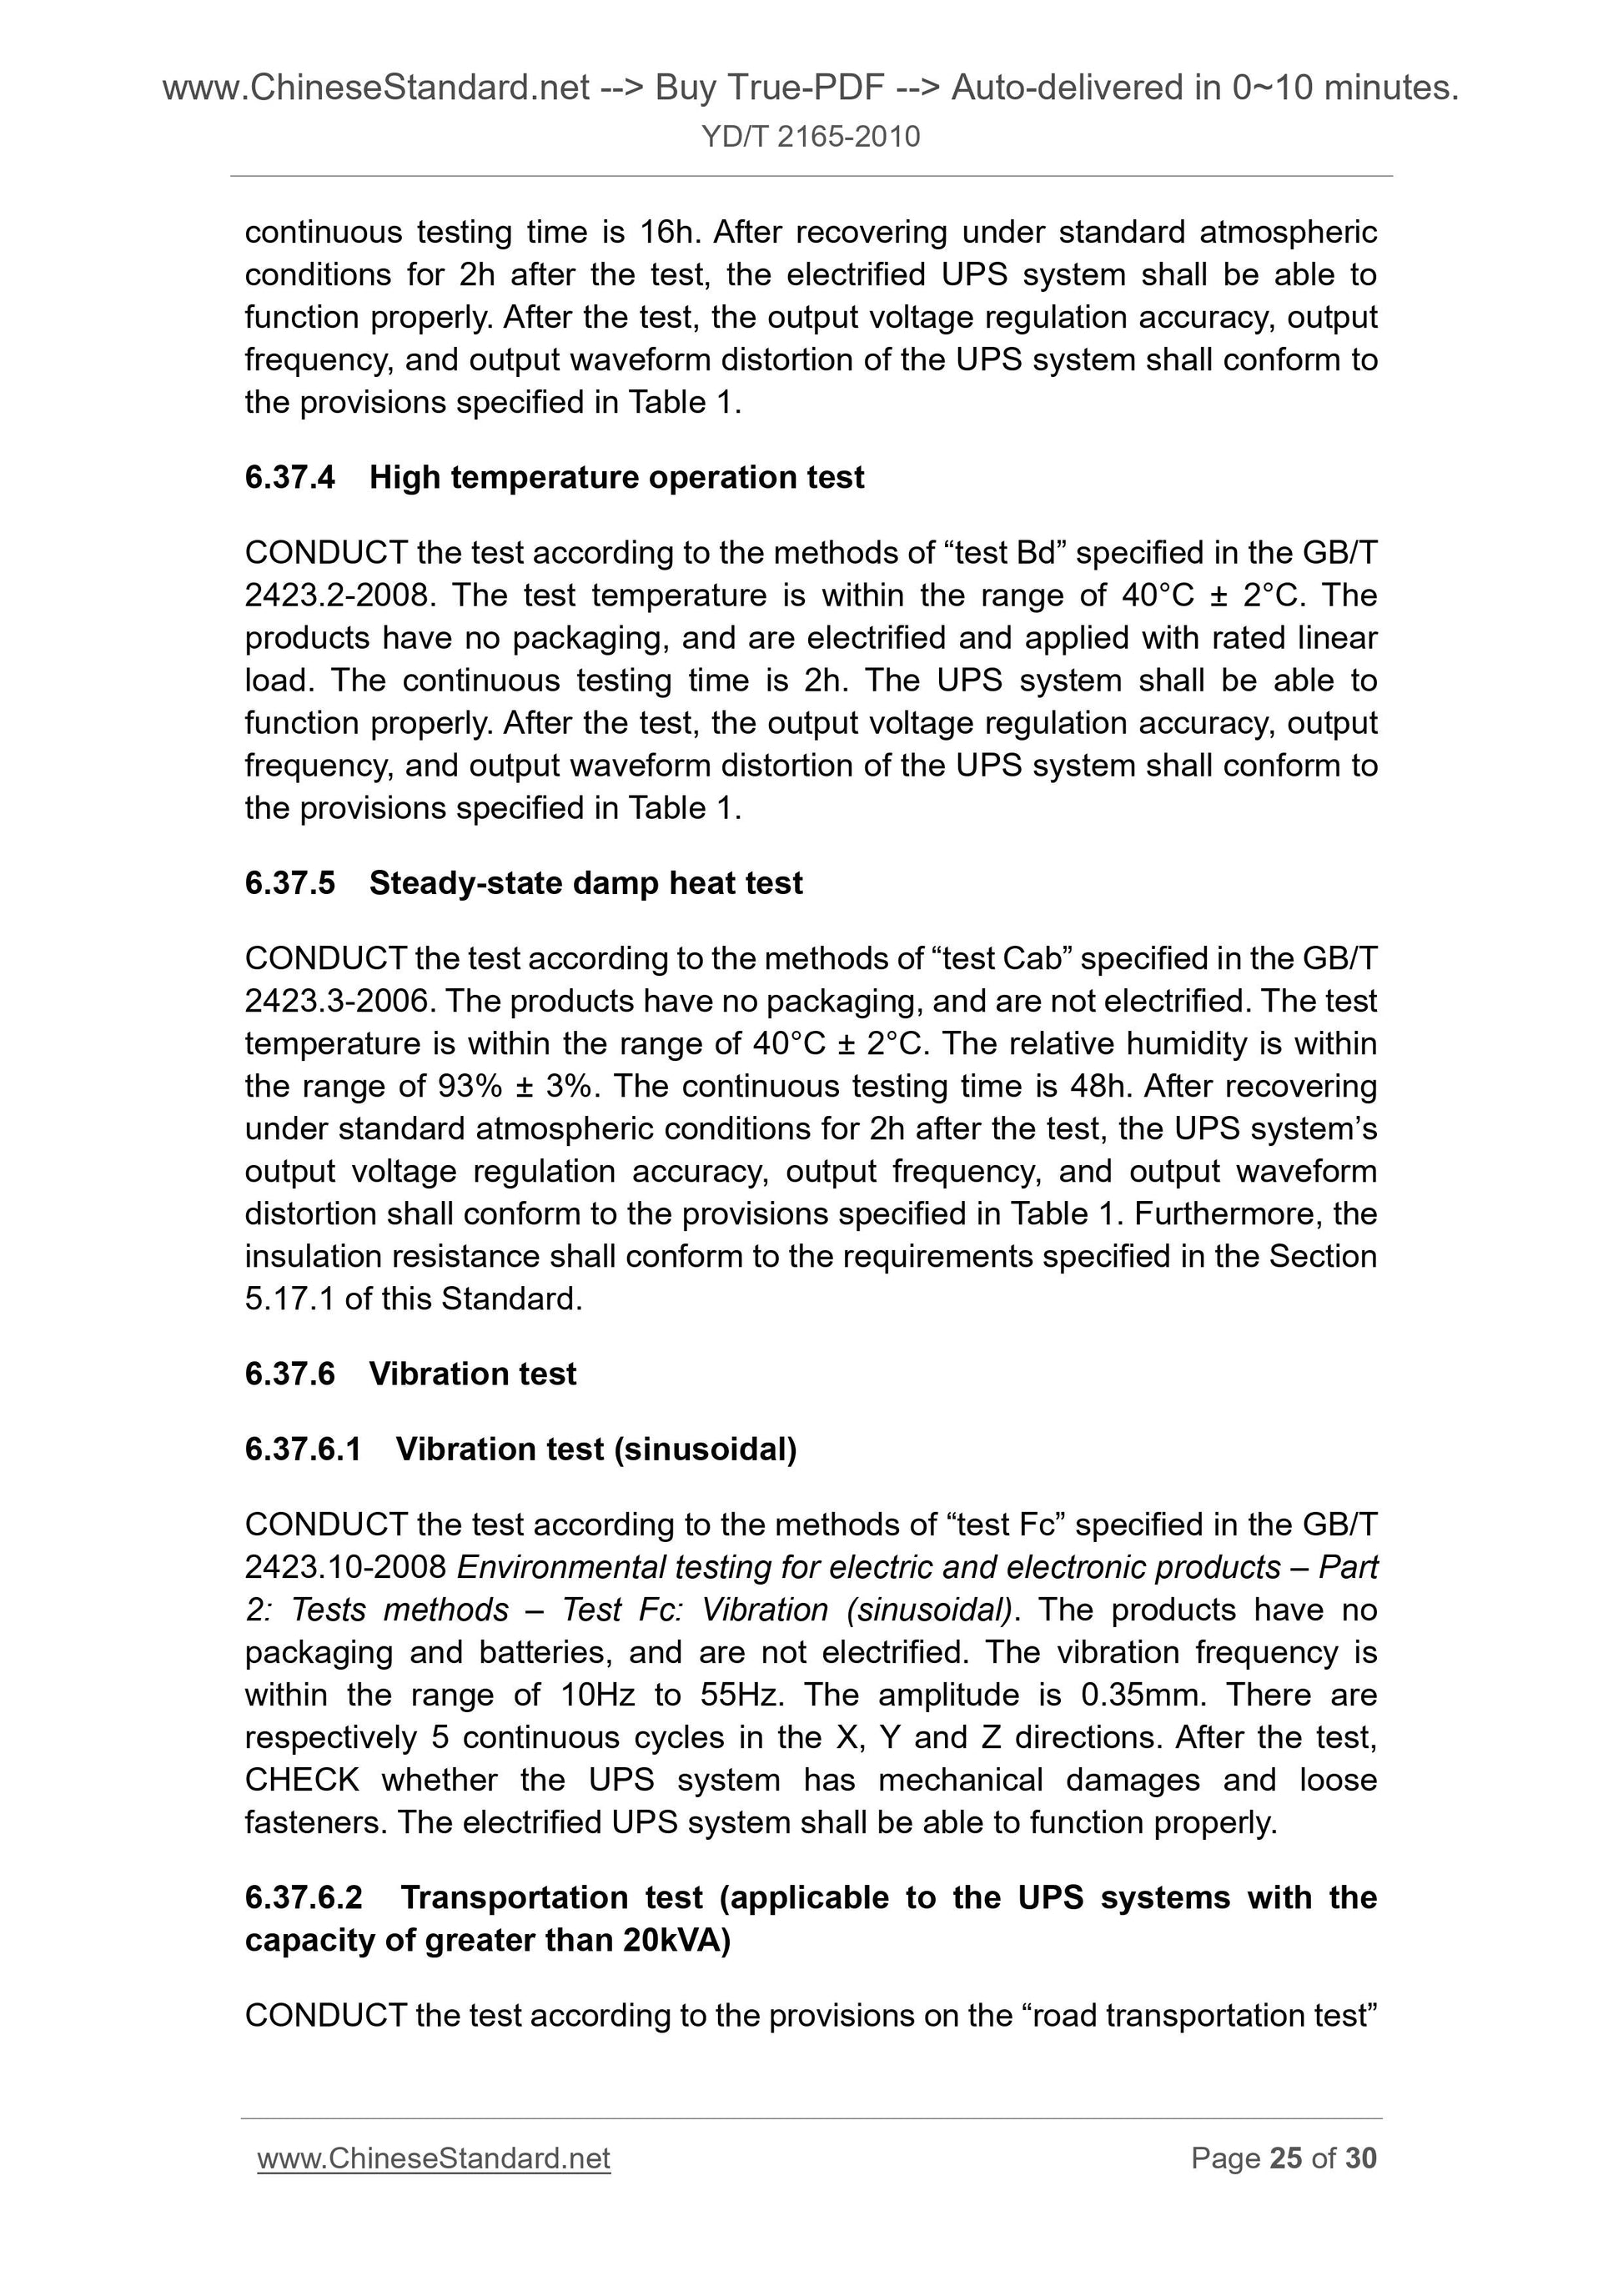 YD/T 2165-2010 Page 11